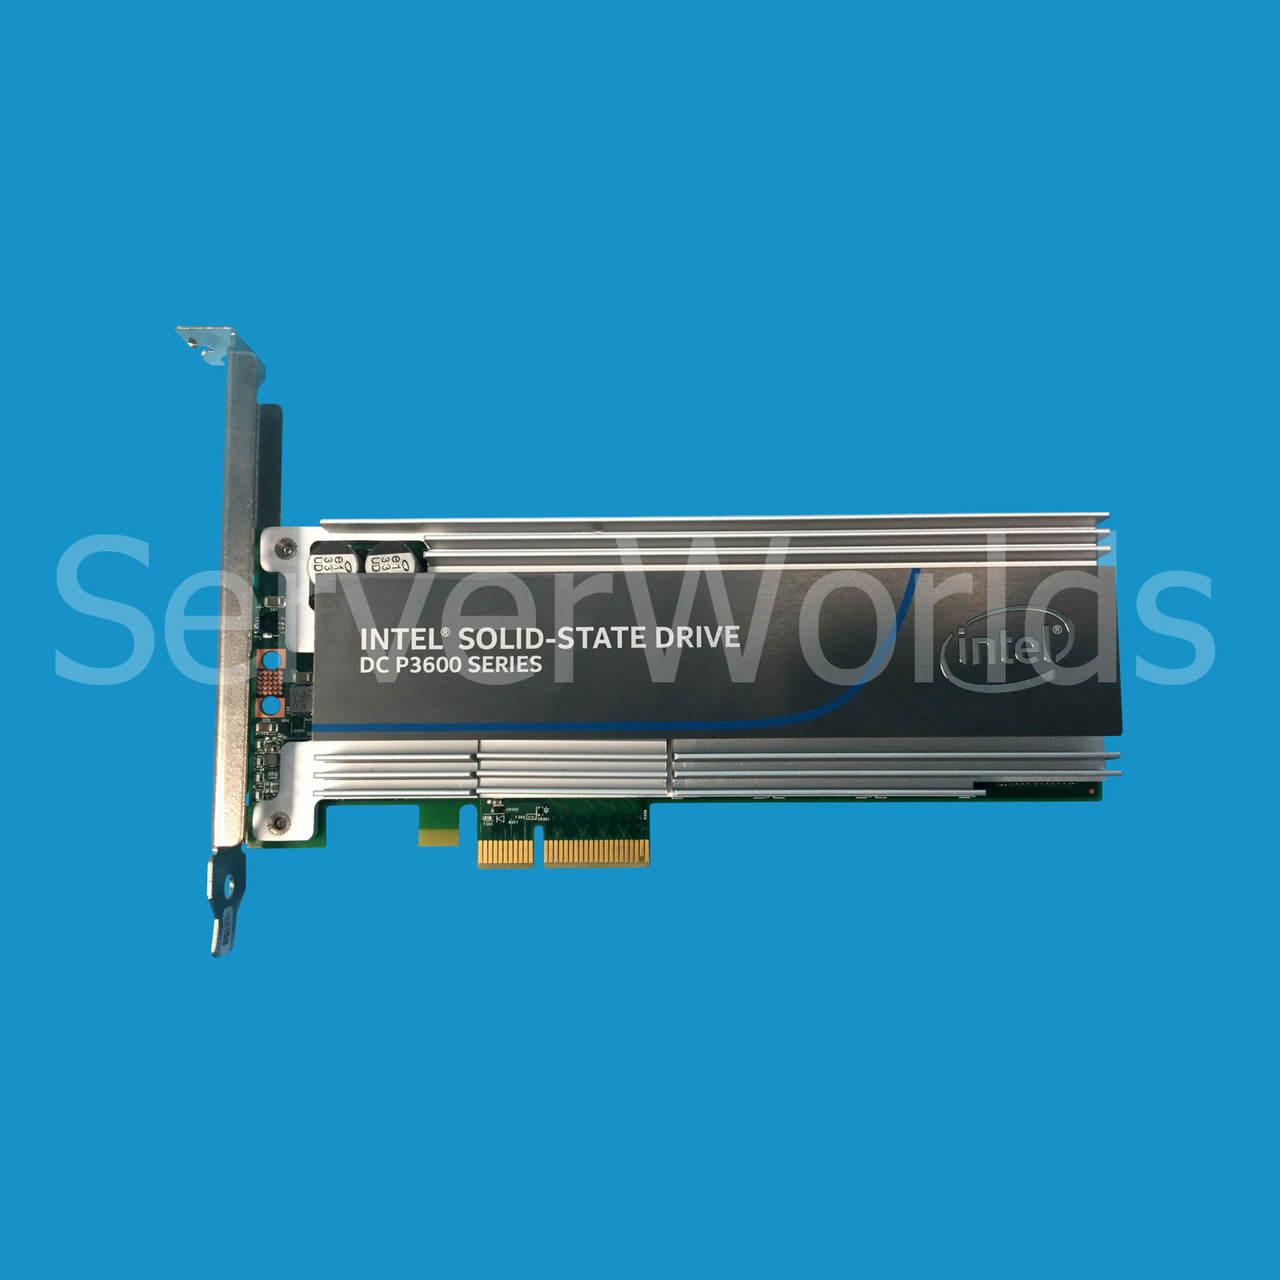 Refurbished HP 803199-001 800GB PCIe Workload Accelerator 804568-001, 803200-B21 Product Label